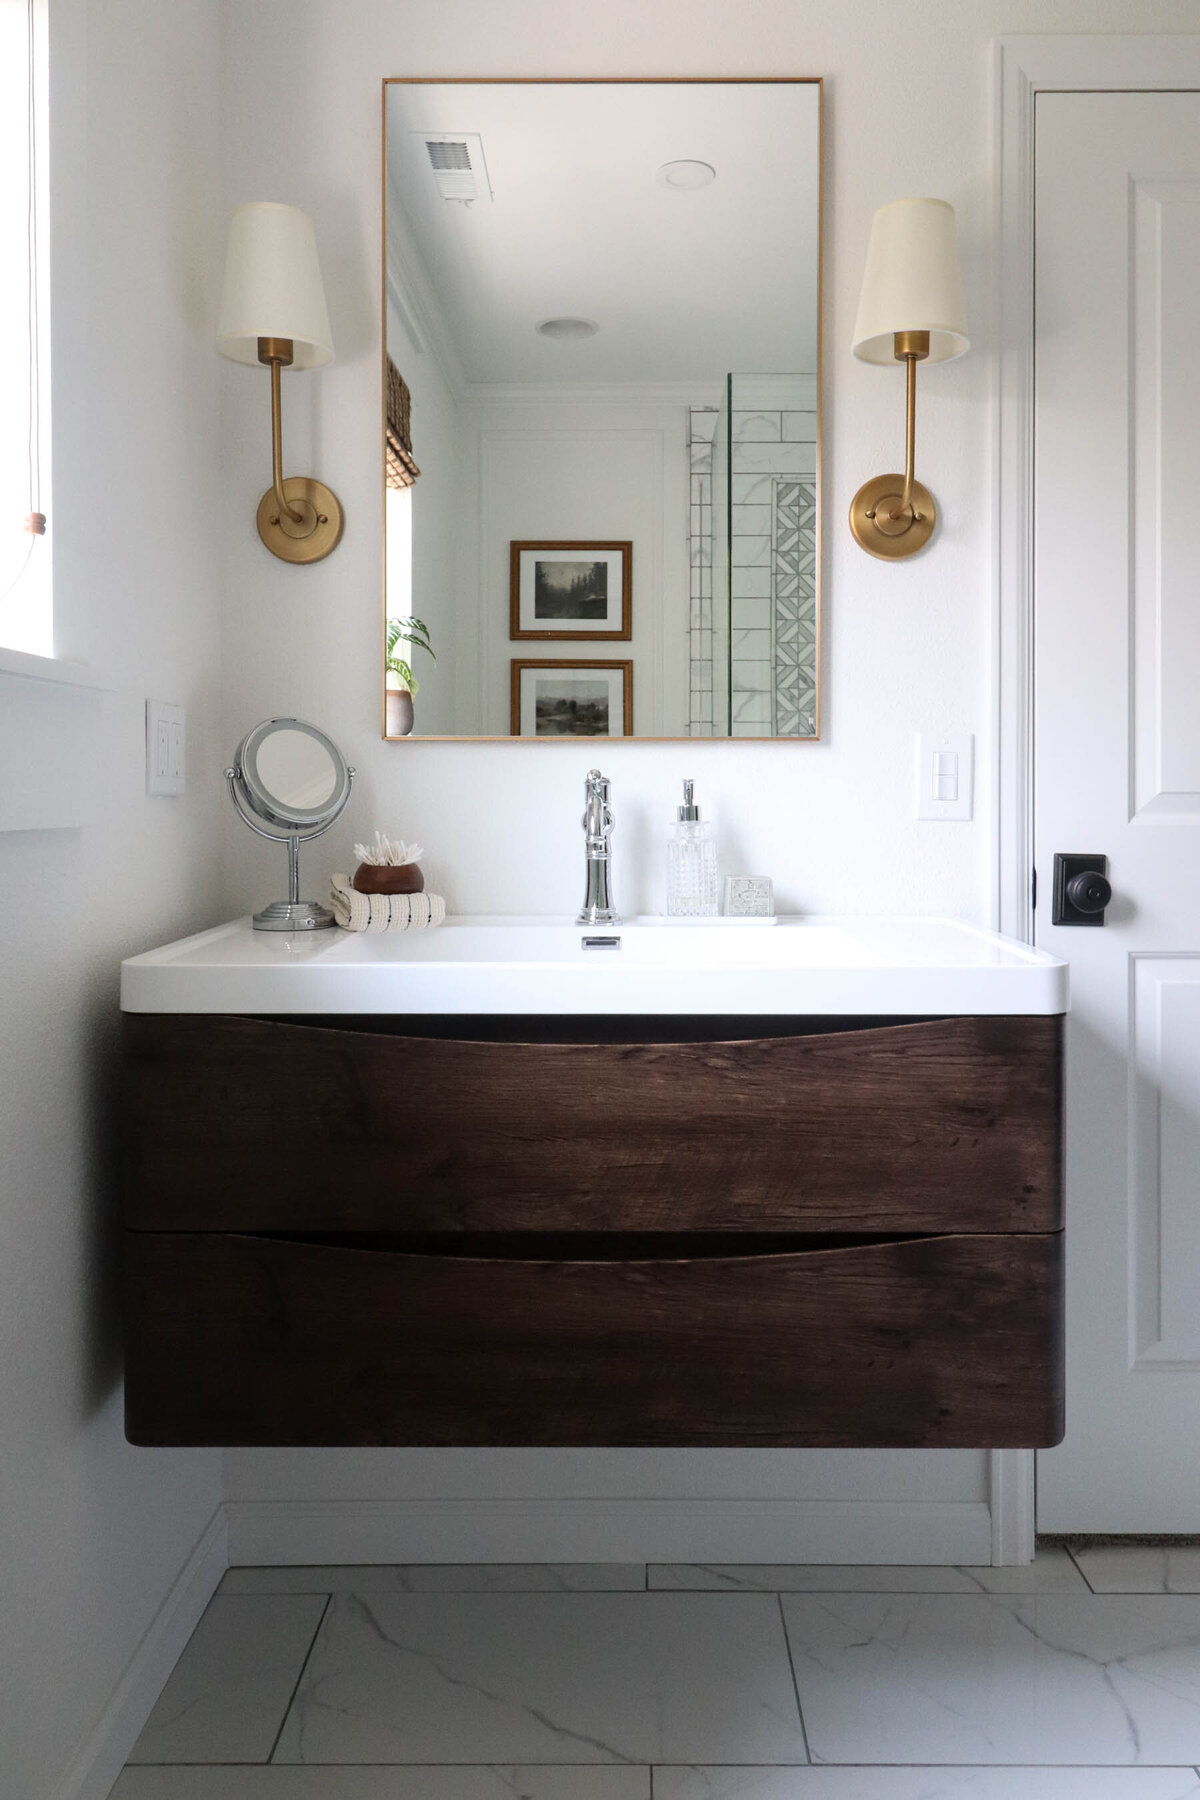 Our Finished Master Bathroom by The Wood Grain Cottage-57